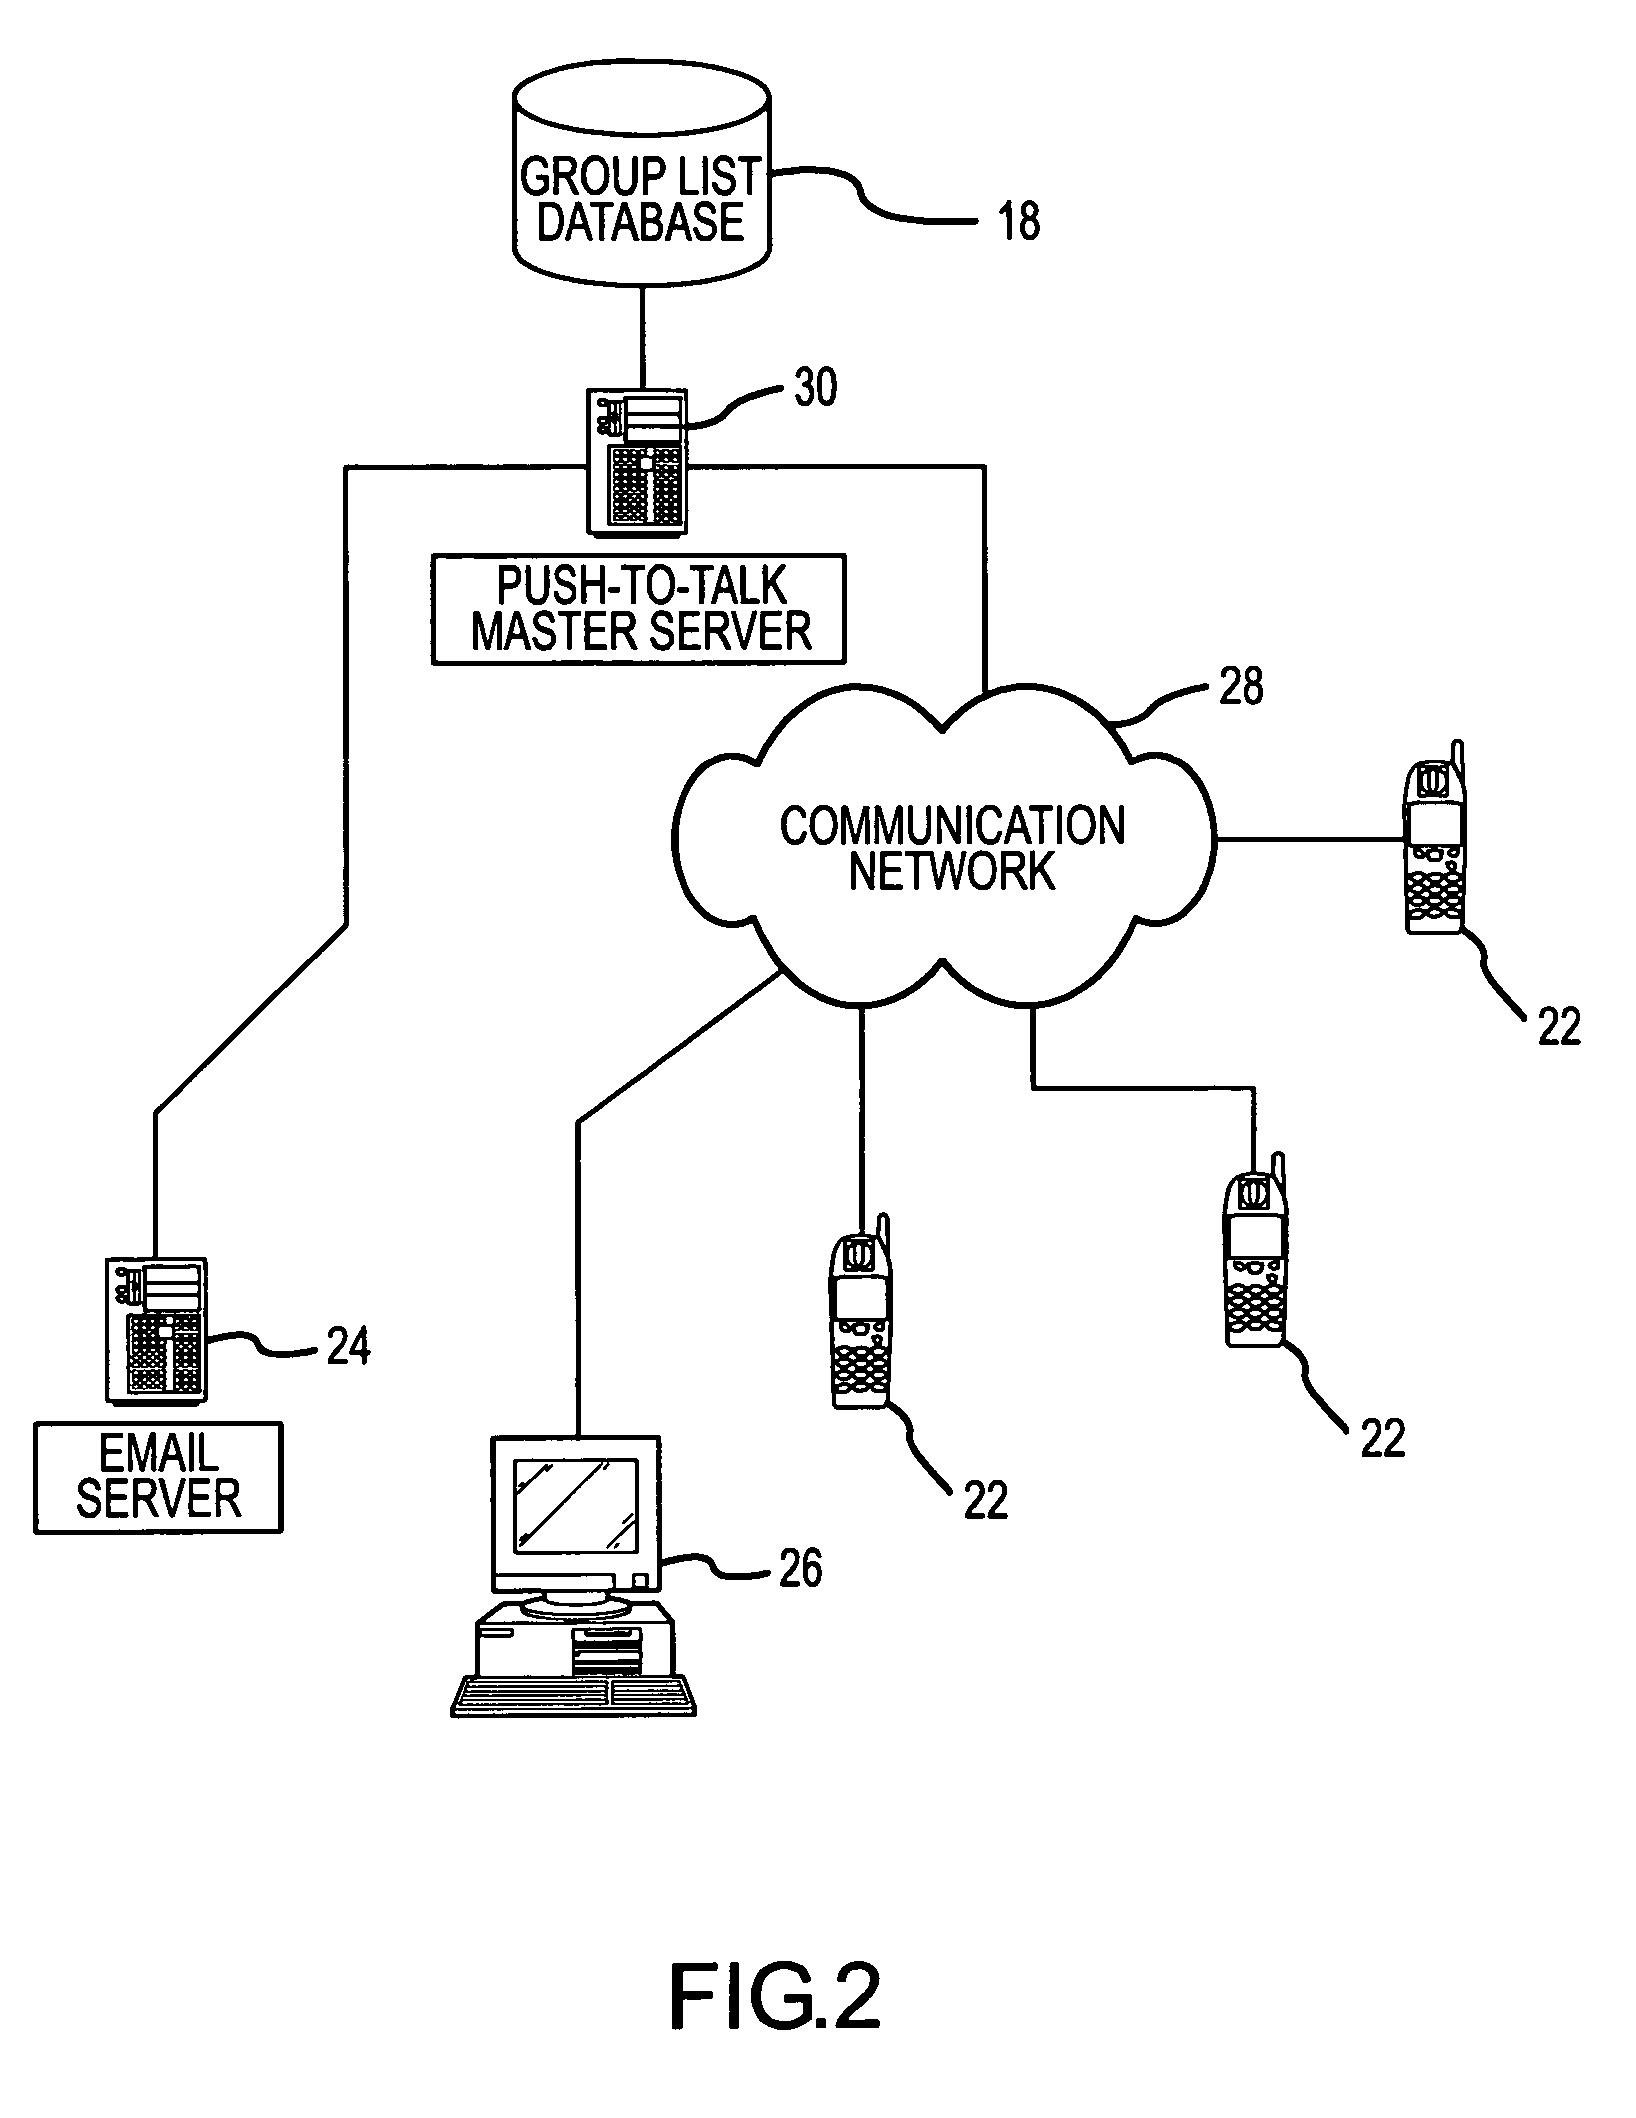 System and method for location based push-to-talk